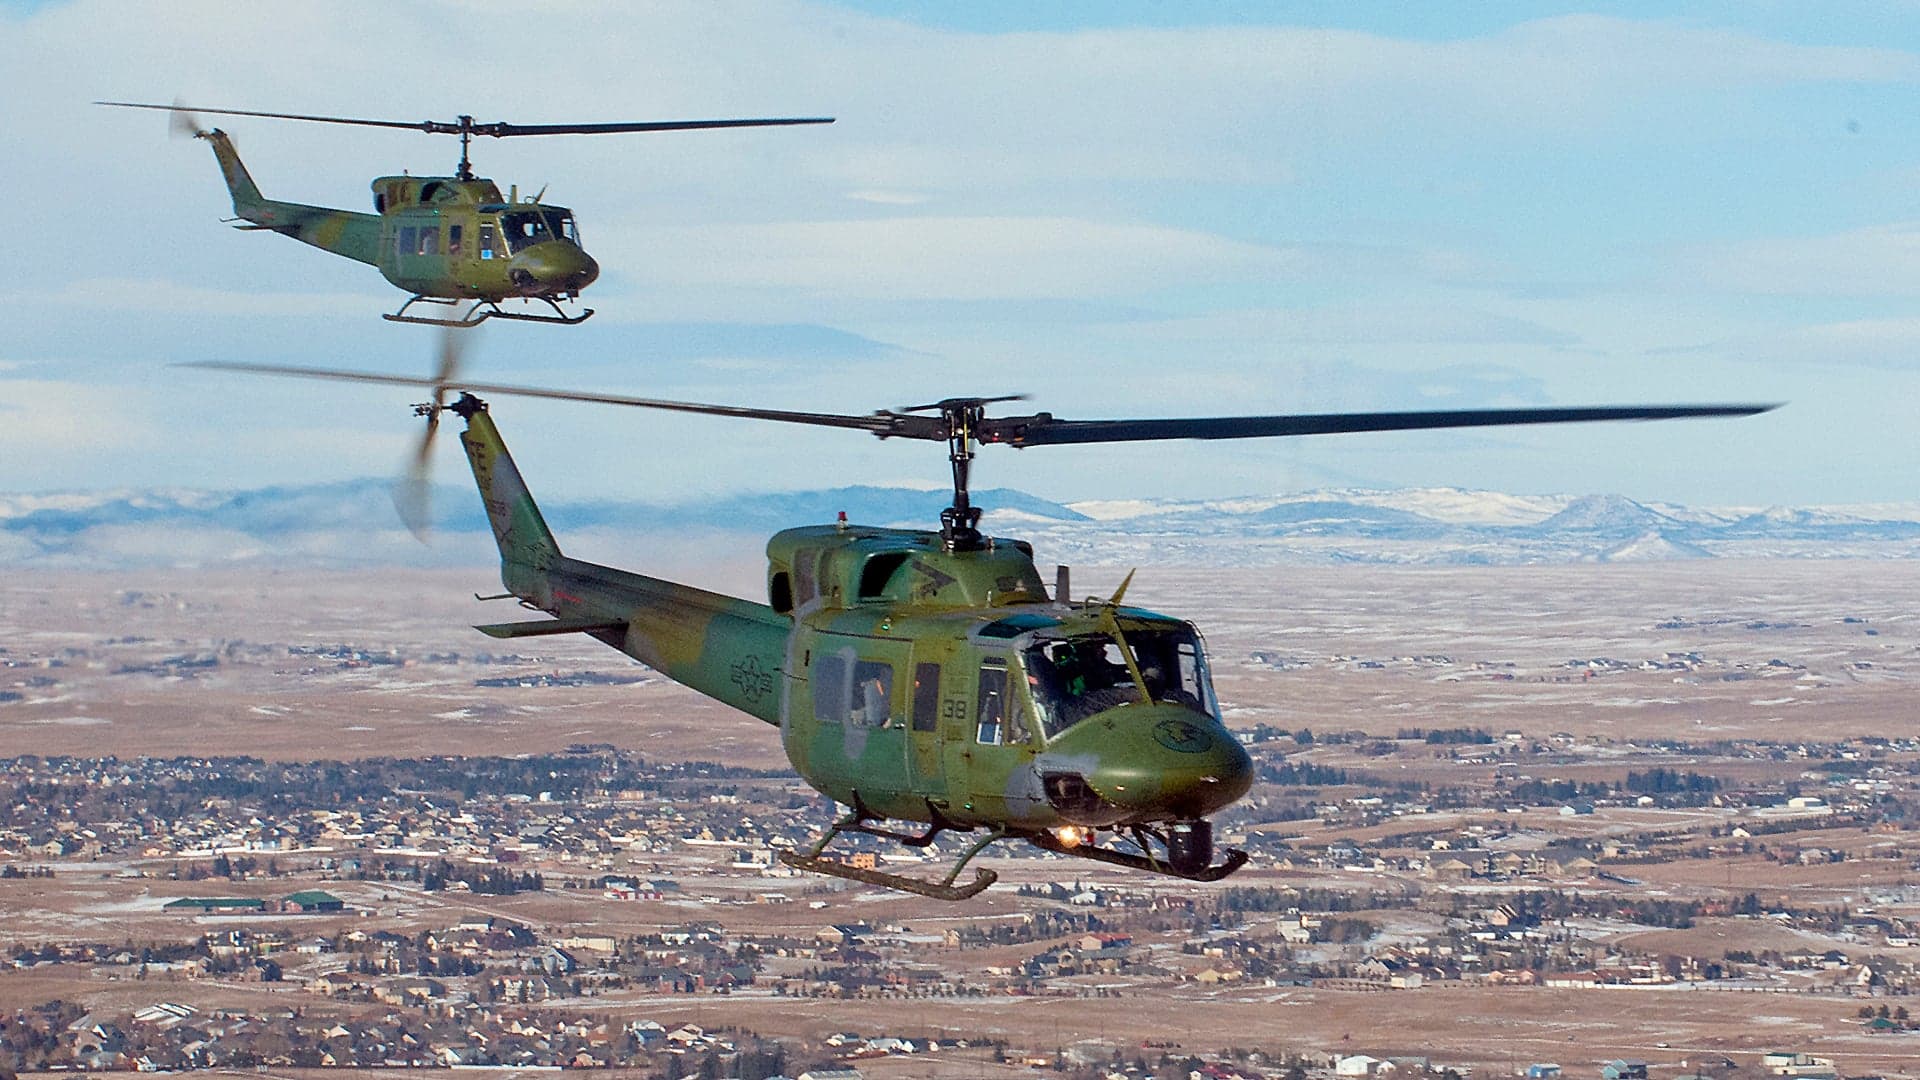 USAF Asks For Bids To Finally Replace Its Antique UH-1N Hueys